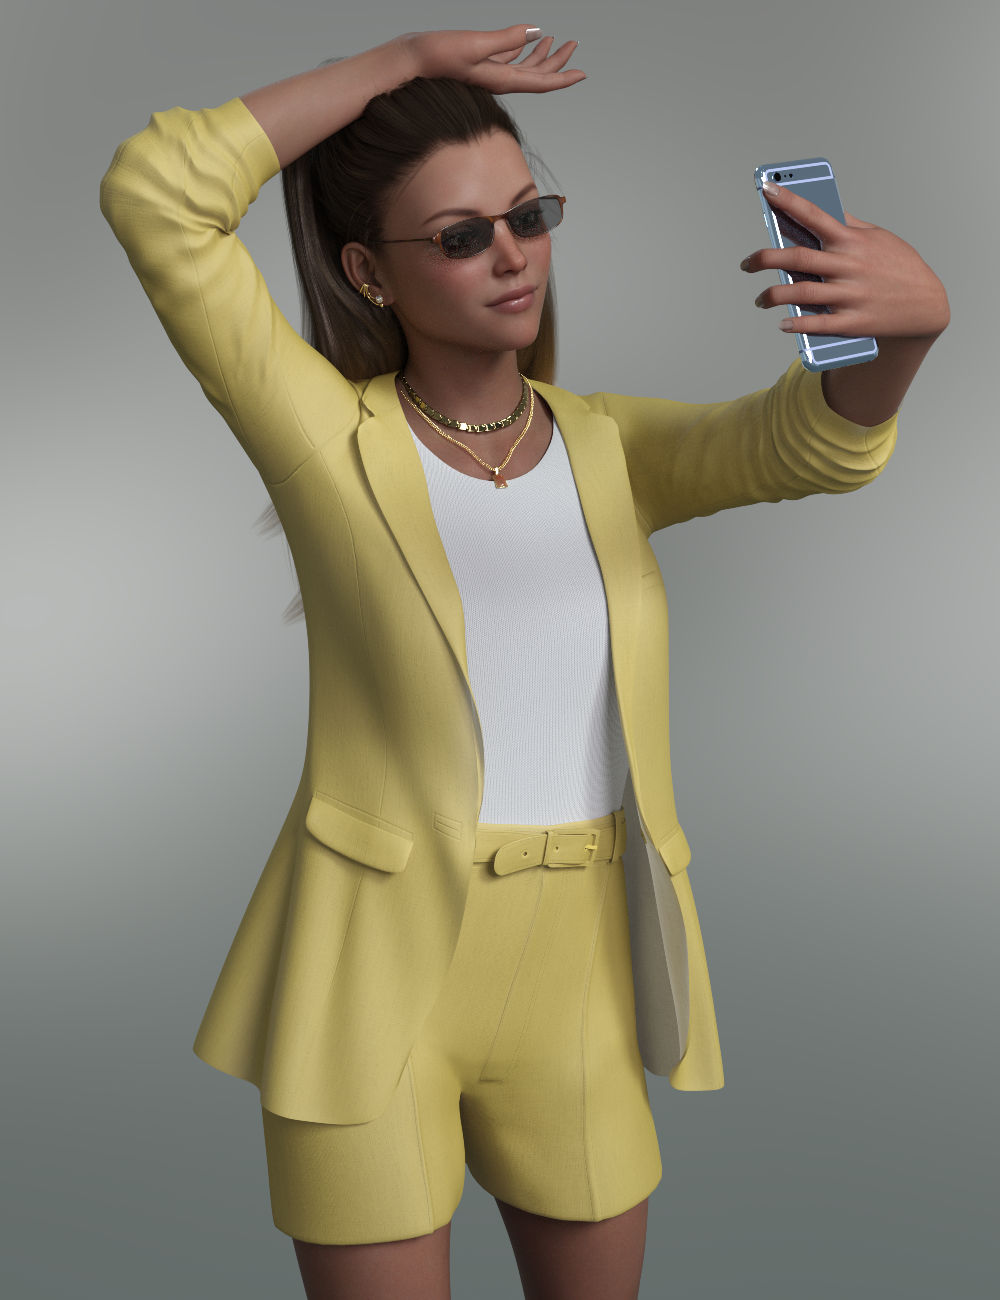 dForce Spring Blazer Outfit for Genesis 8 and 8.1 Females by: WildDesigns, 3D Models by Daz 3D